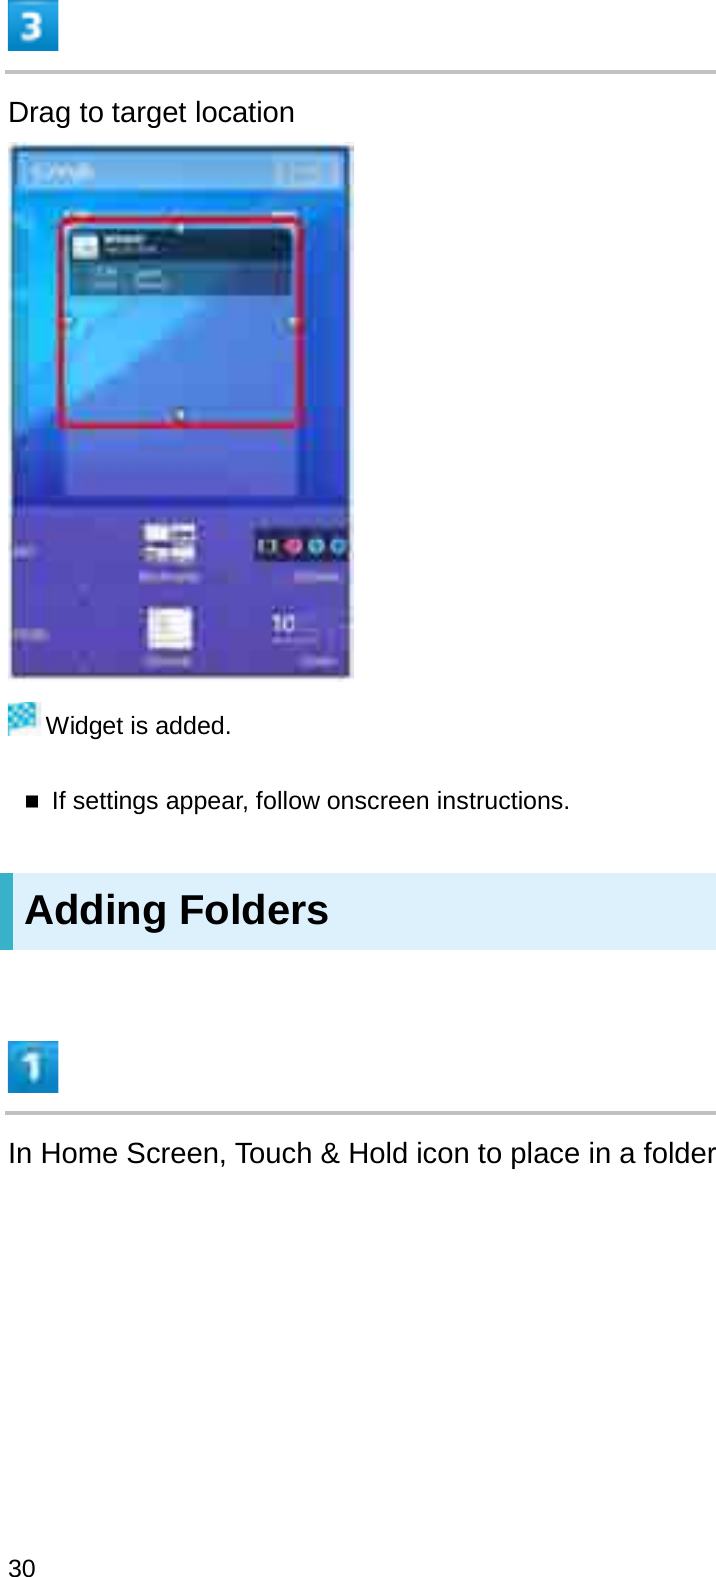 Drag to target locationWidget is added.If settings appear, follow onscreen instructions.Adding FoldersIn Home Screen, Touch &amp; Hold icon to place in a folder30